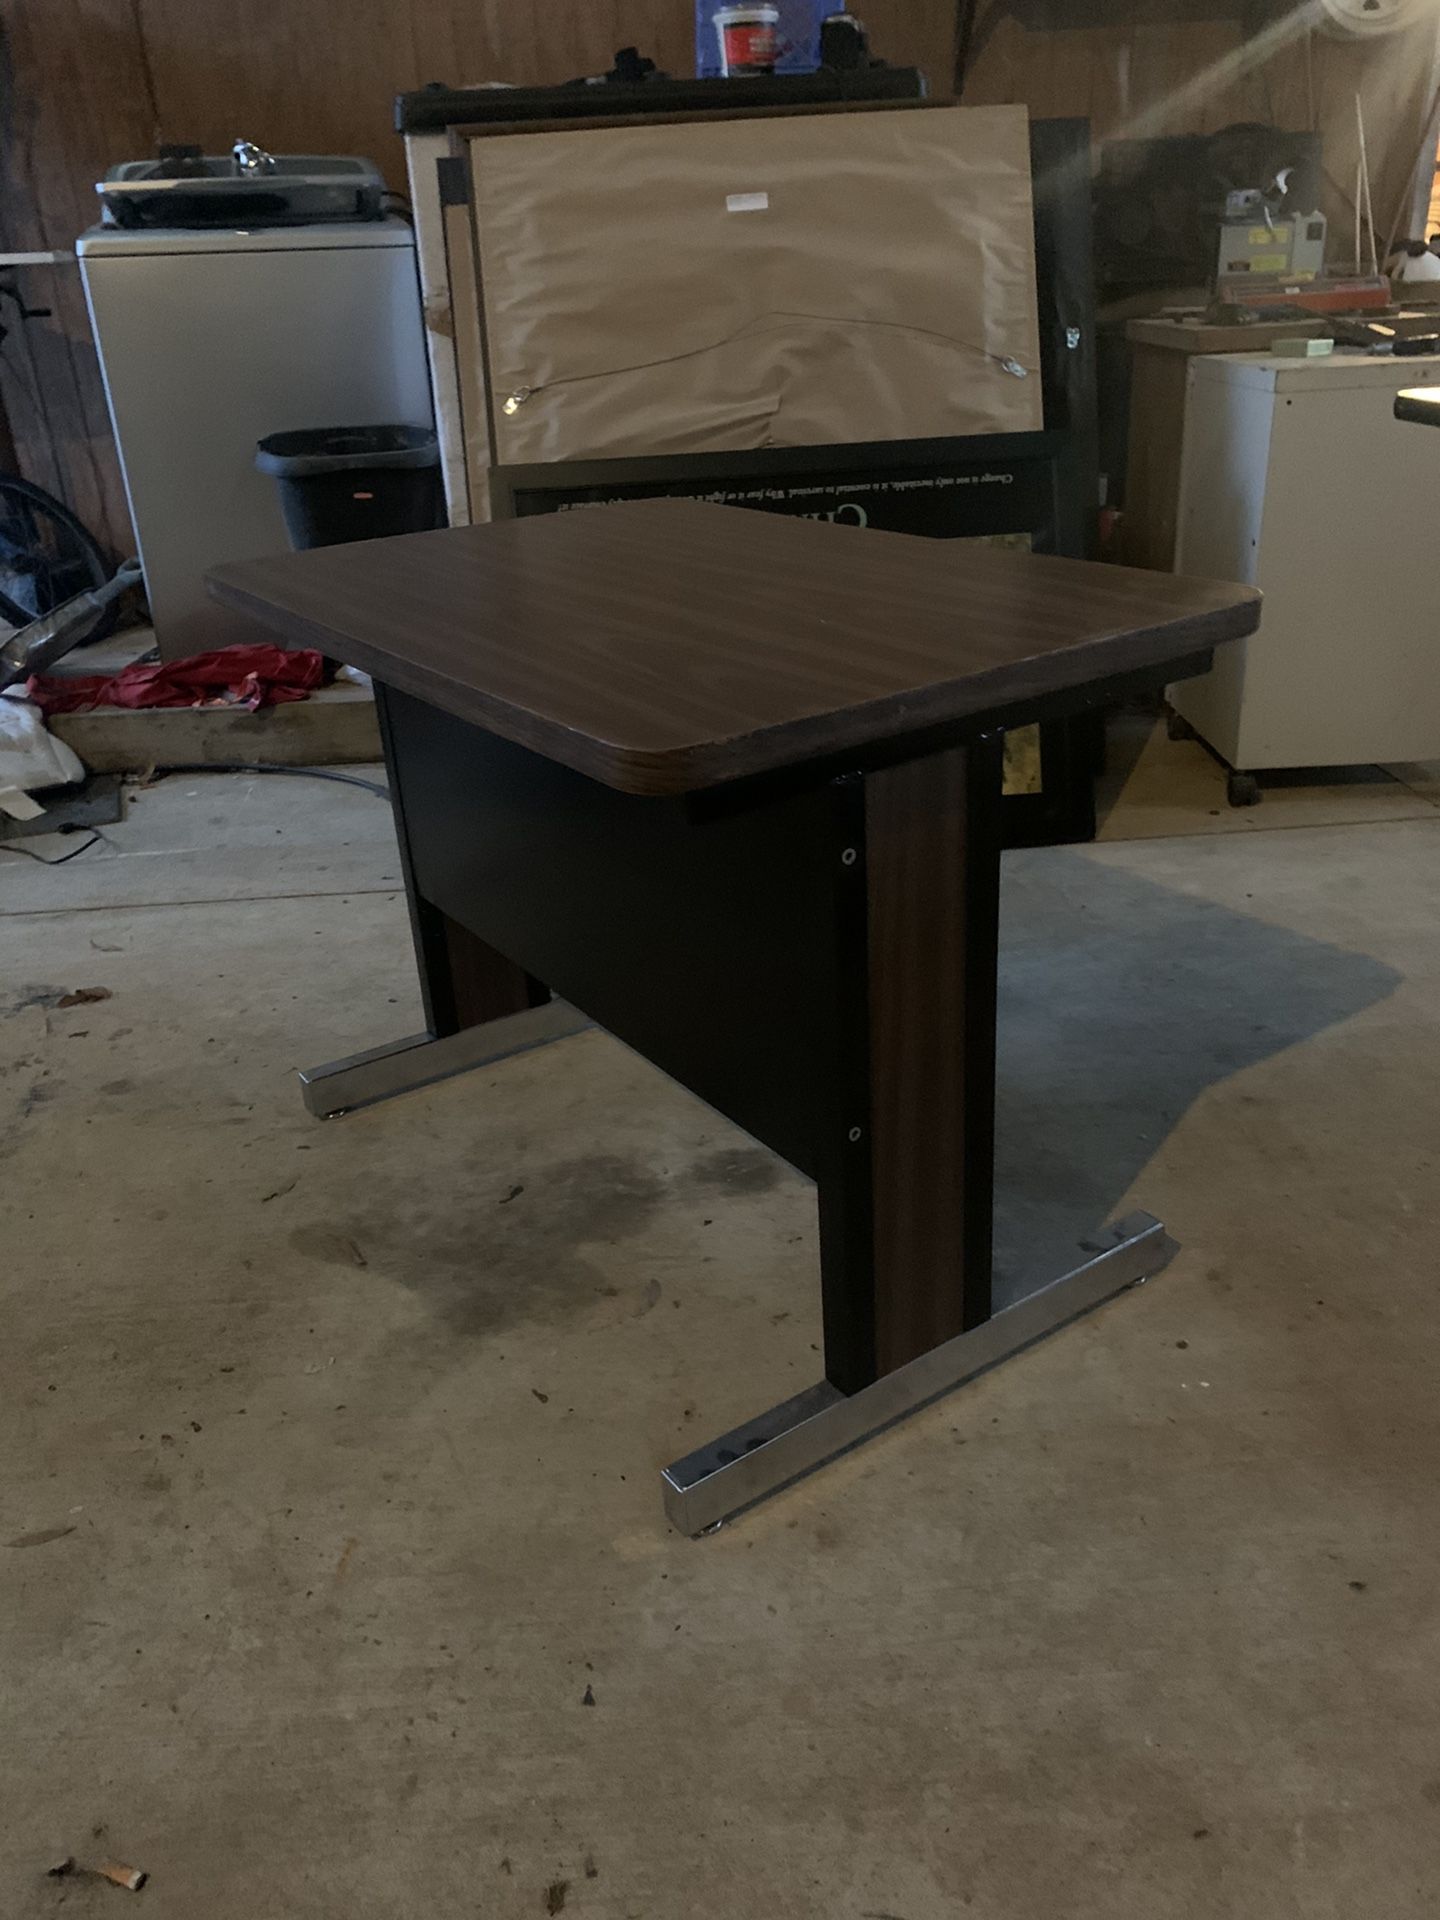 Office Desk $30 Will Deliver If In The Sherwood/Jacksonville/Cabot Area